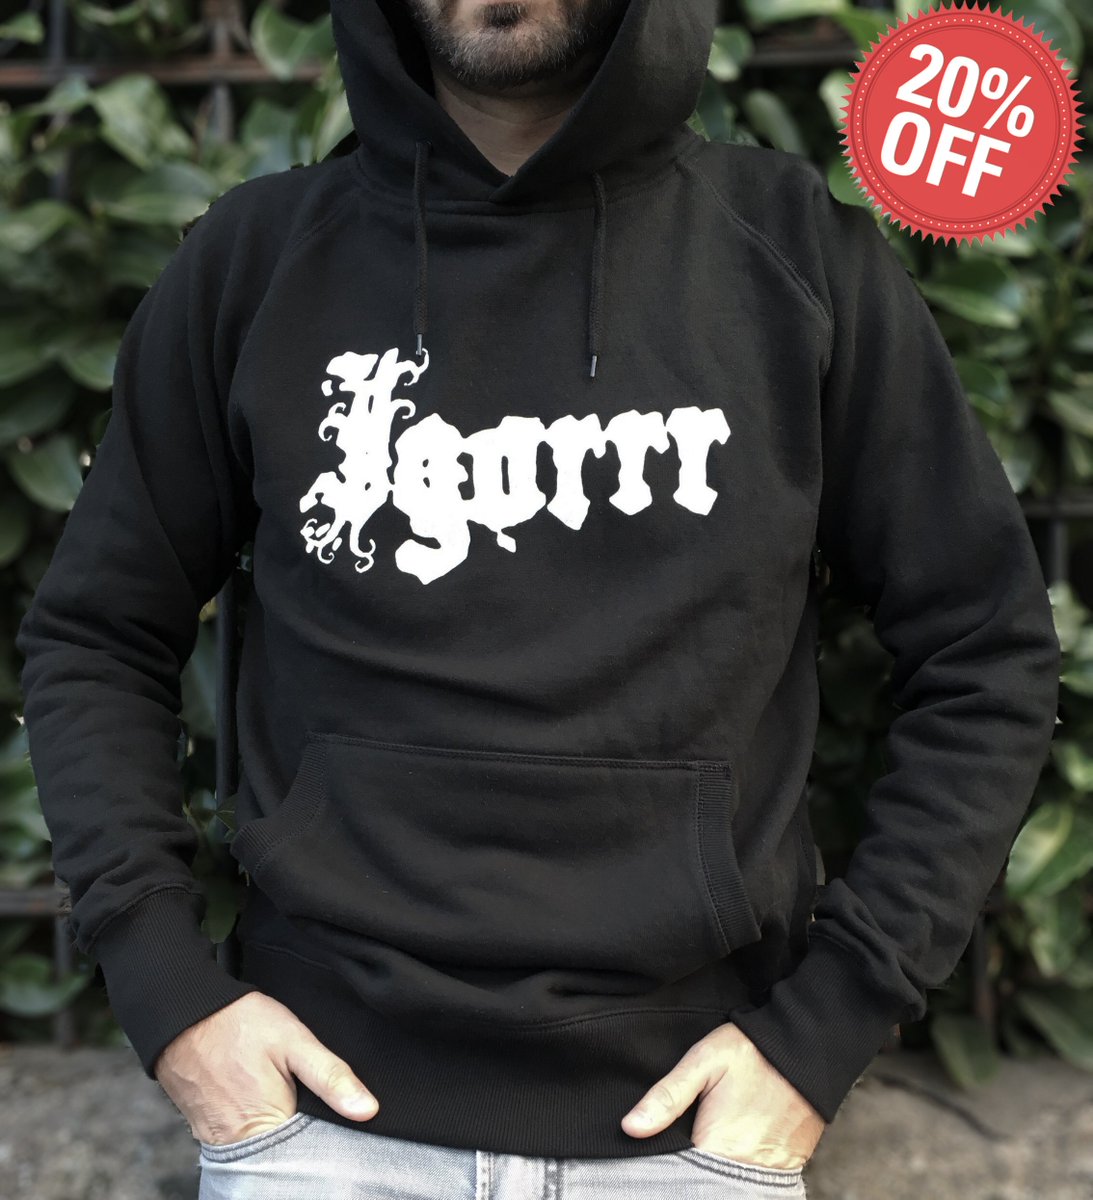 There is 20% Off sale on all Igorrr clothes on igorrr.bigcartel.com !!!